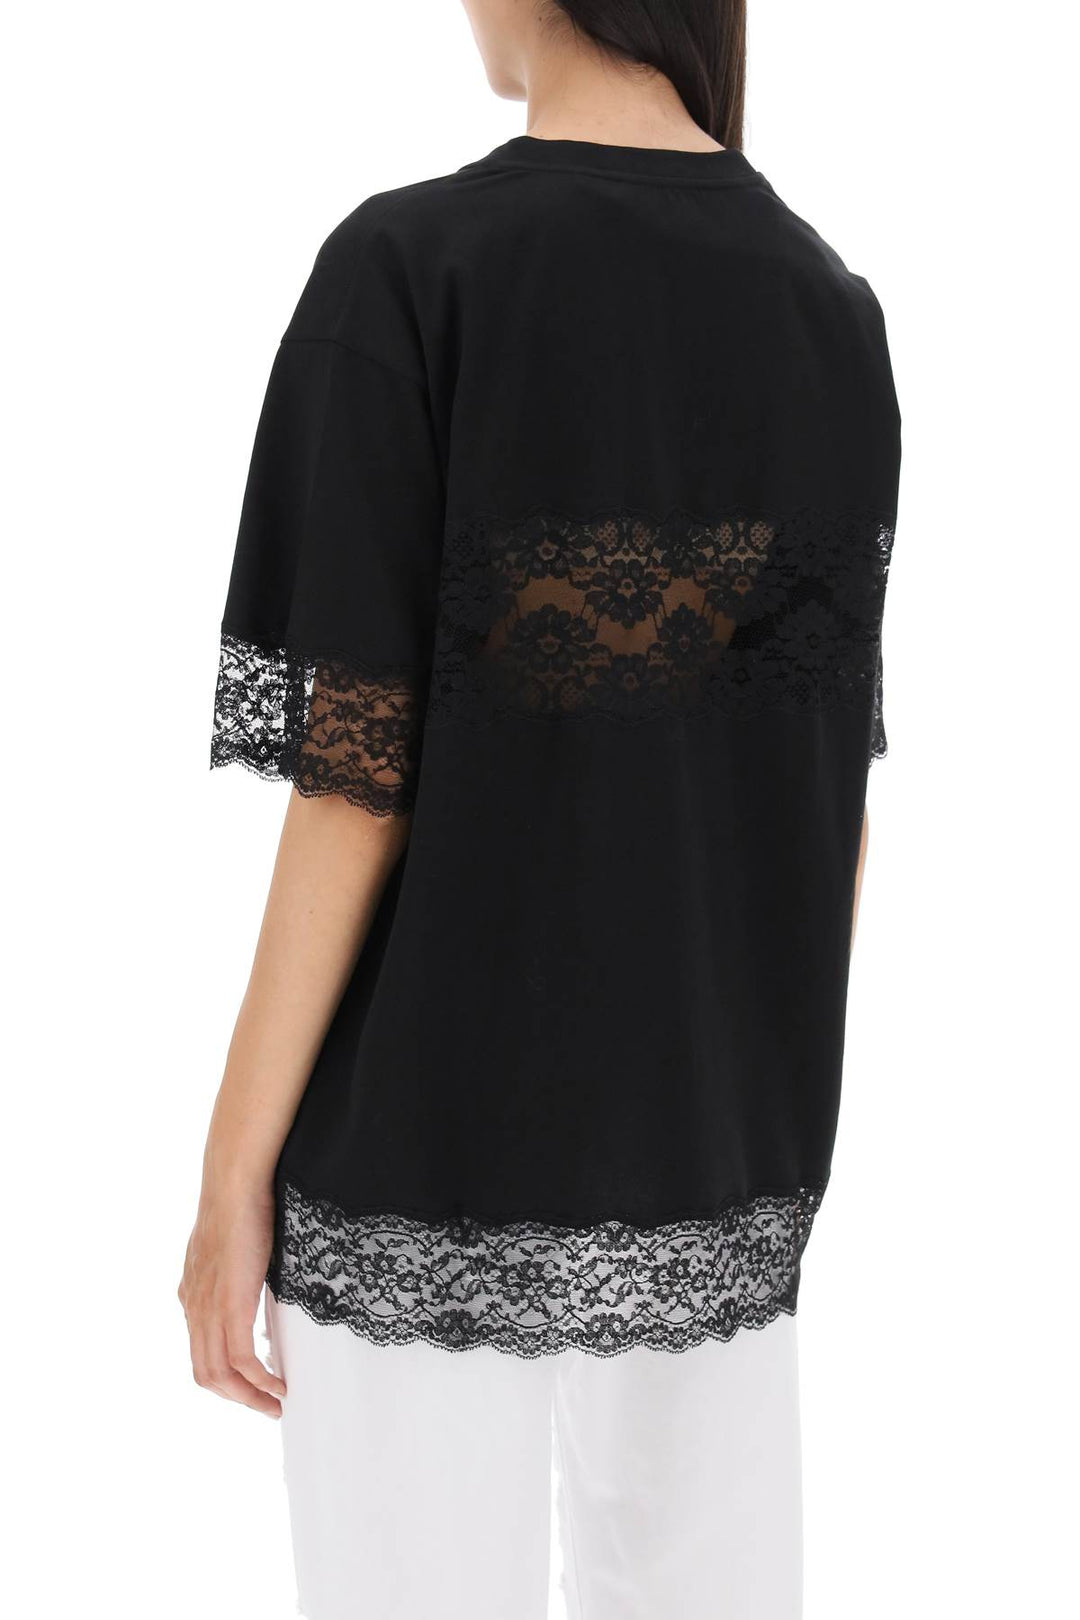 Dolce & gabbana t-shirt with lace inserts-2